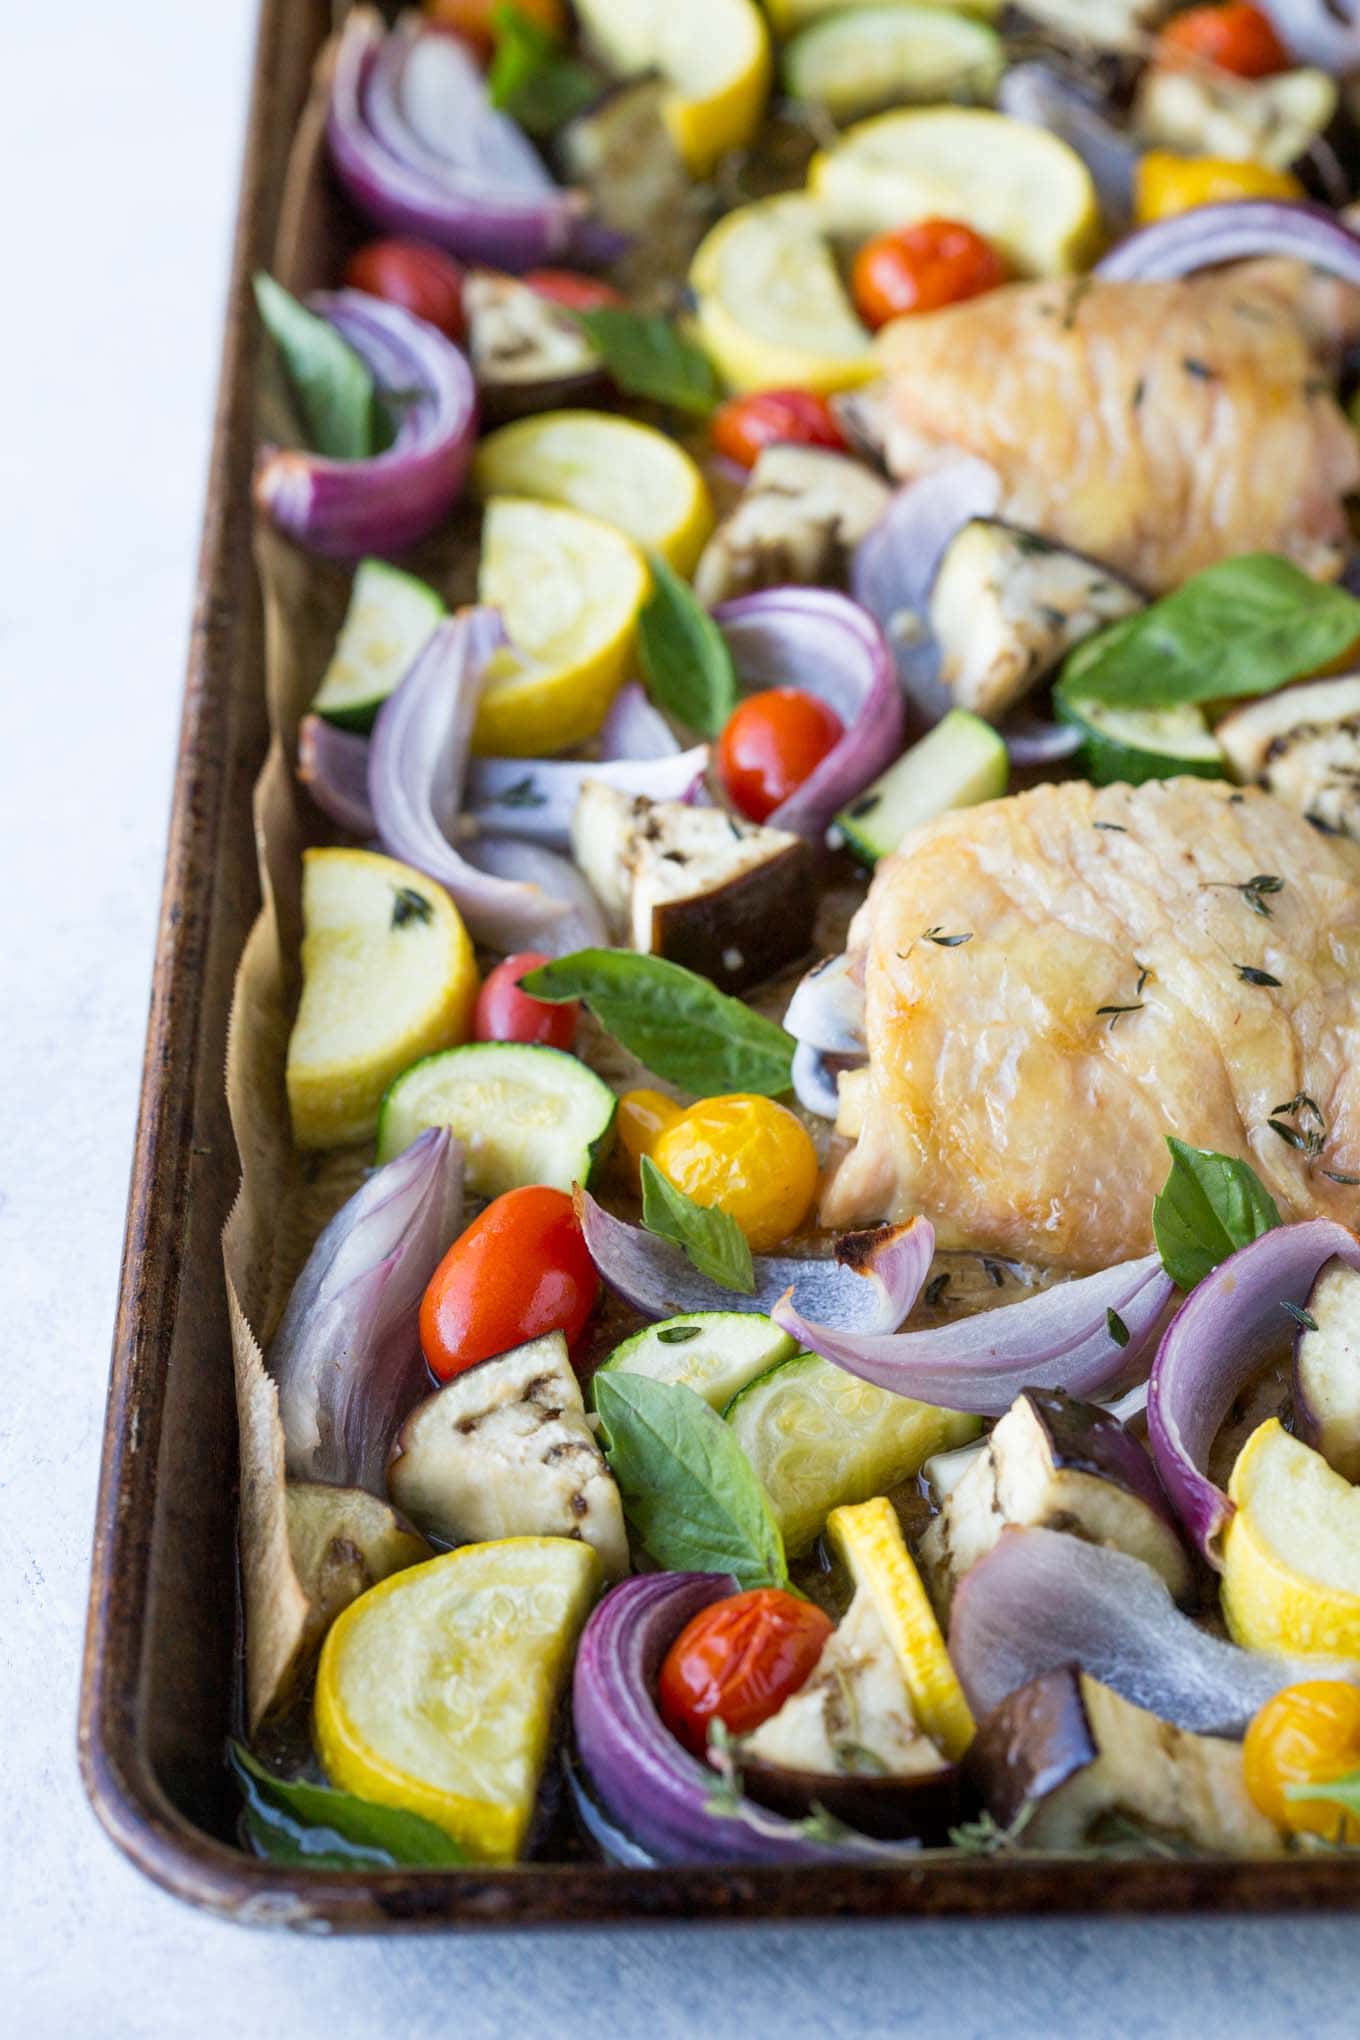 Sheet pan Chicken with Roasted Ratatouille! This healthy one pan meal is gluten free, paleo, whole30, and low carb.